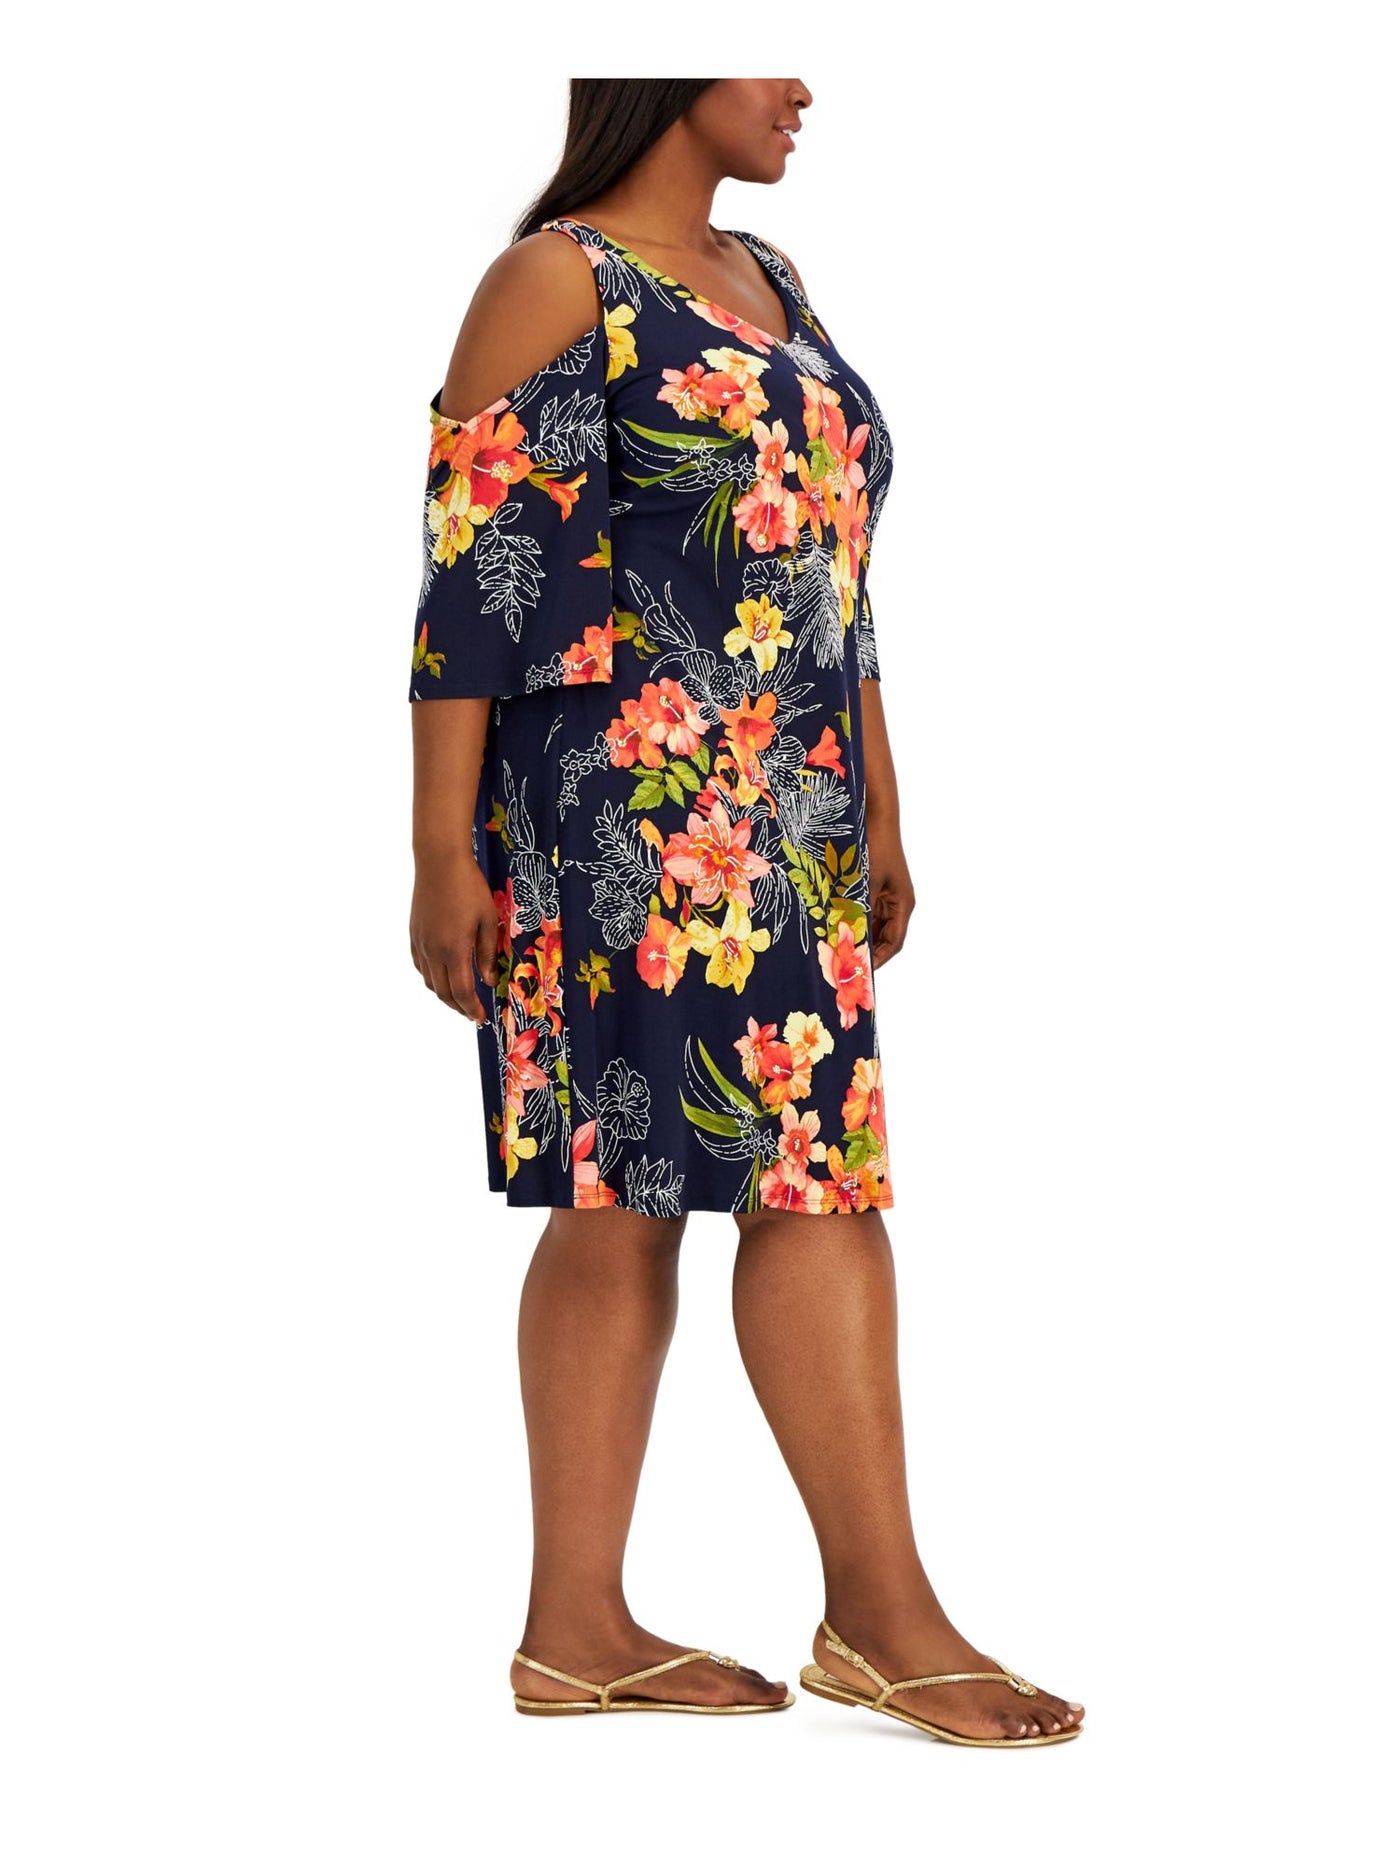 CONNECTED APPAREL Womens Navy Cold Shoulder Pullover Unlined Floral 3/4 Sleeve V Neck Knee Length Fit + Flare Dress Plus 14W